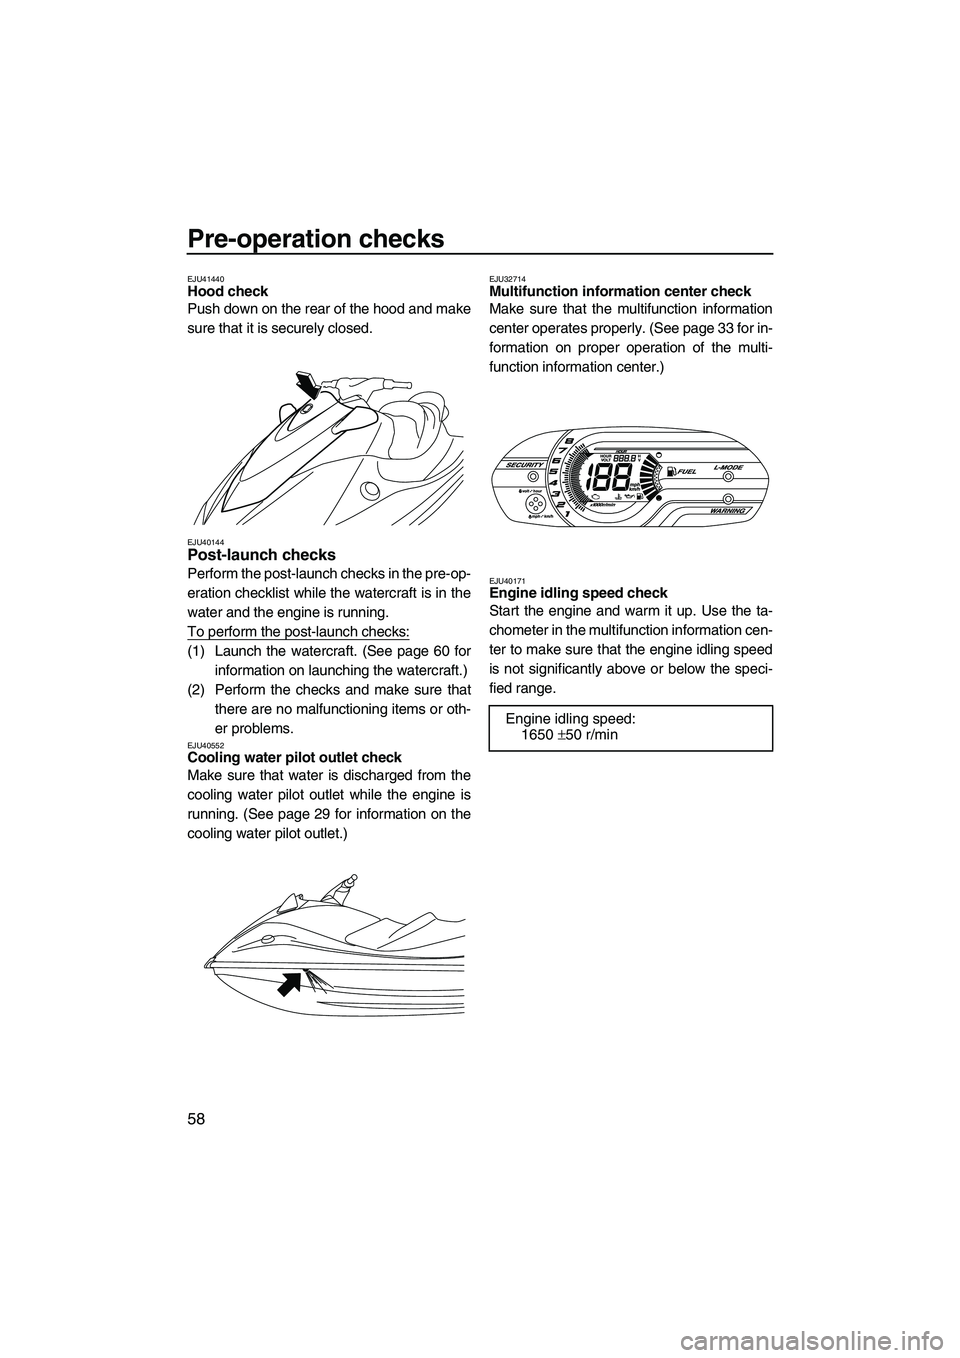 YAMAHA VX SPORT 2013  Owners Manual Pre-operation checks
58
EJU41440Hood check 
Push down on the rear of the hood and make
sure that it is securely closed.
EJU40144Post-launch checks 
Perform the post-launch checks in the pre-op-
eratio